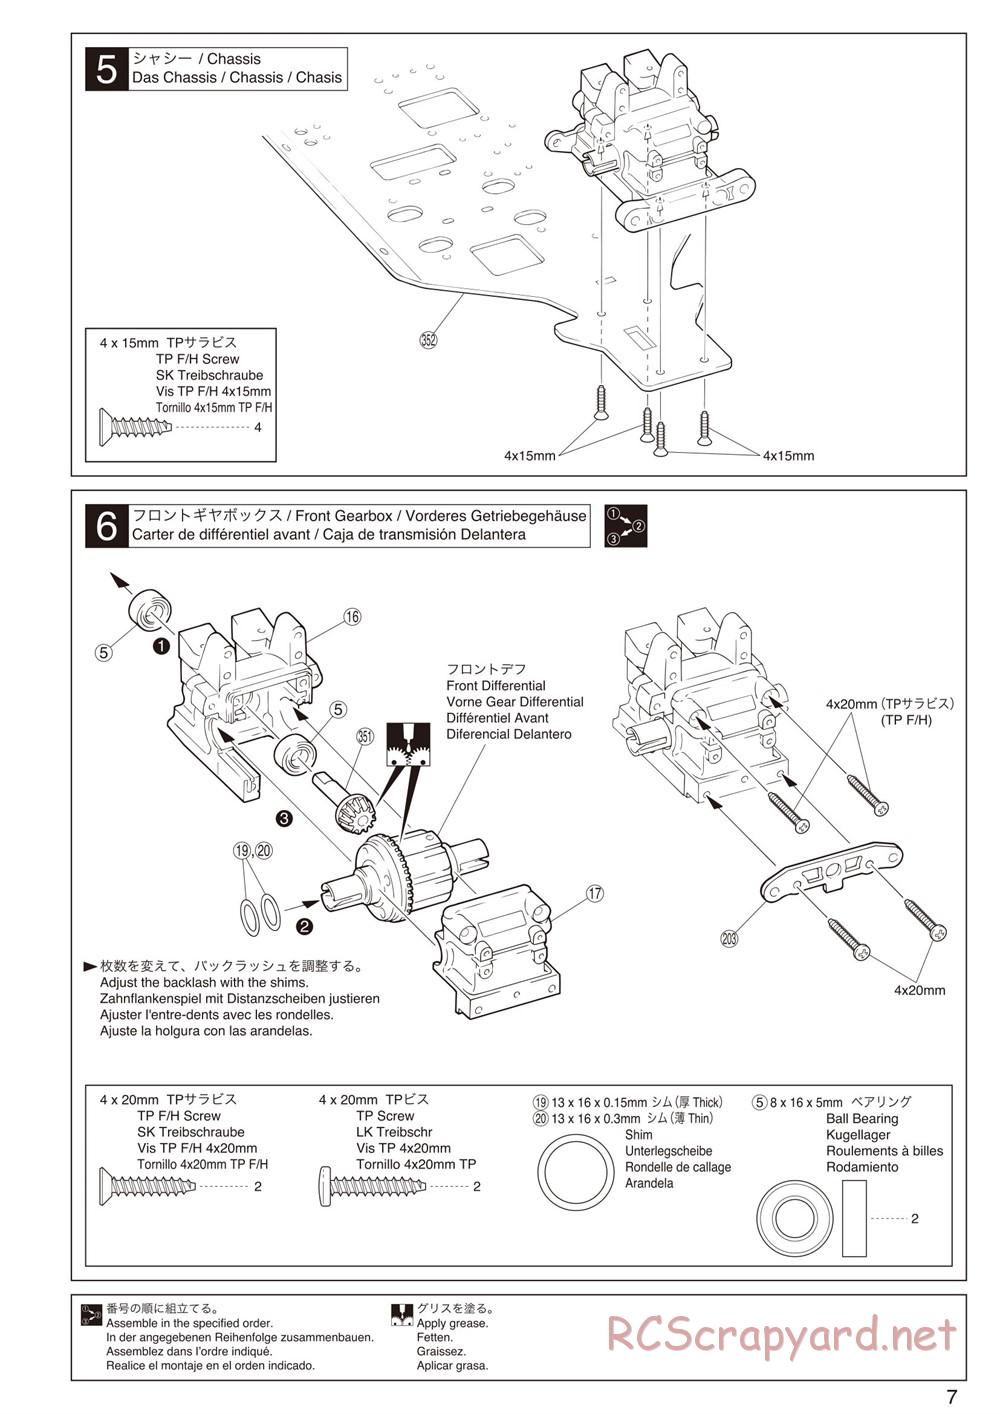 Kyosho - Inferno Neo ST - Manual - Page 7